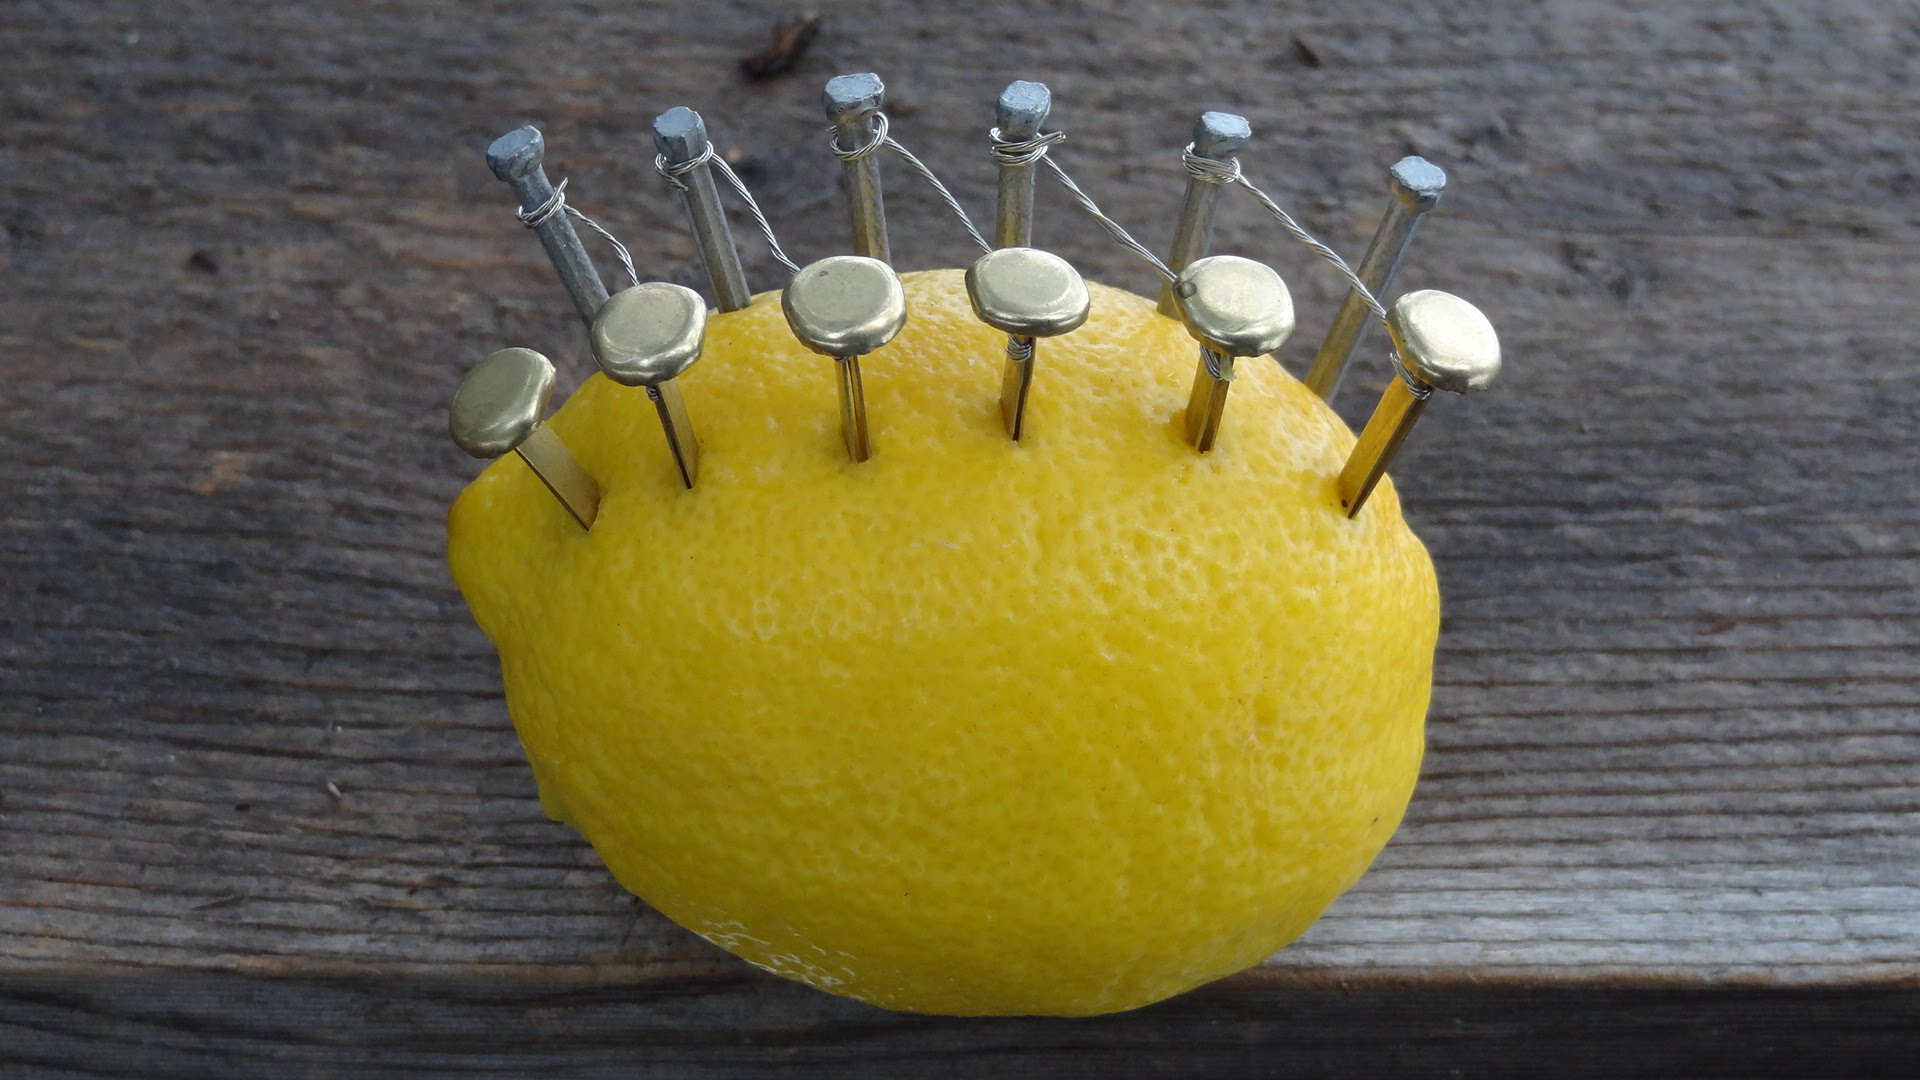 How To Start A Fire With A Lemon